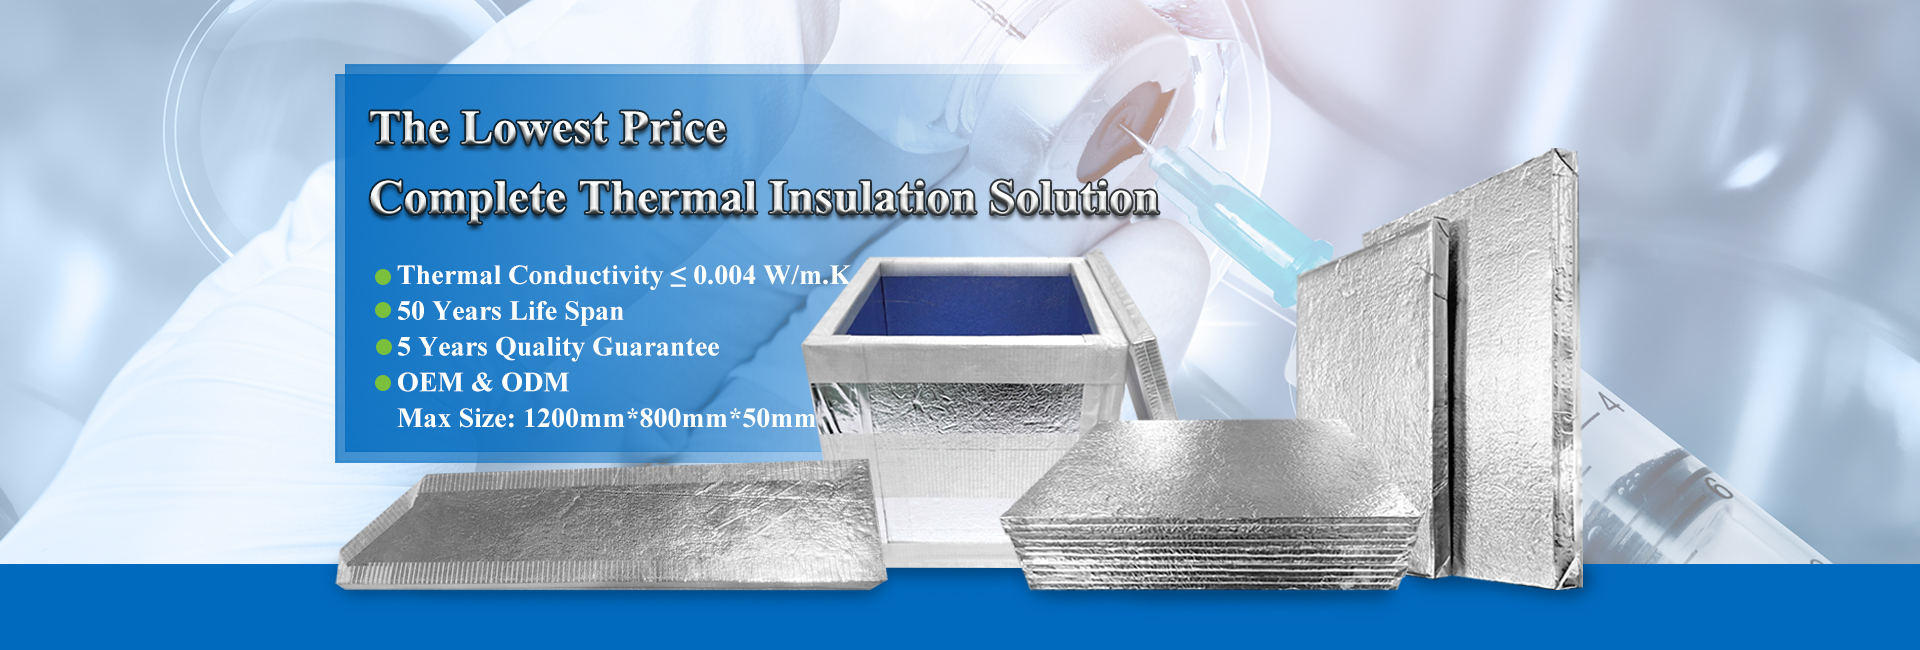 https://www.zerothermolip.com/fumed-silica-vacuum-insulation-panel-for-cold-chain-logistics-product/